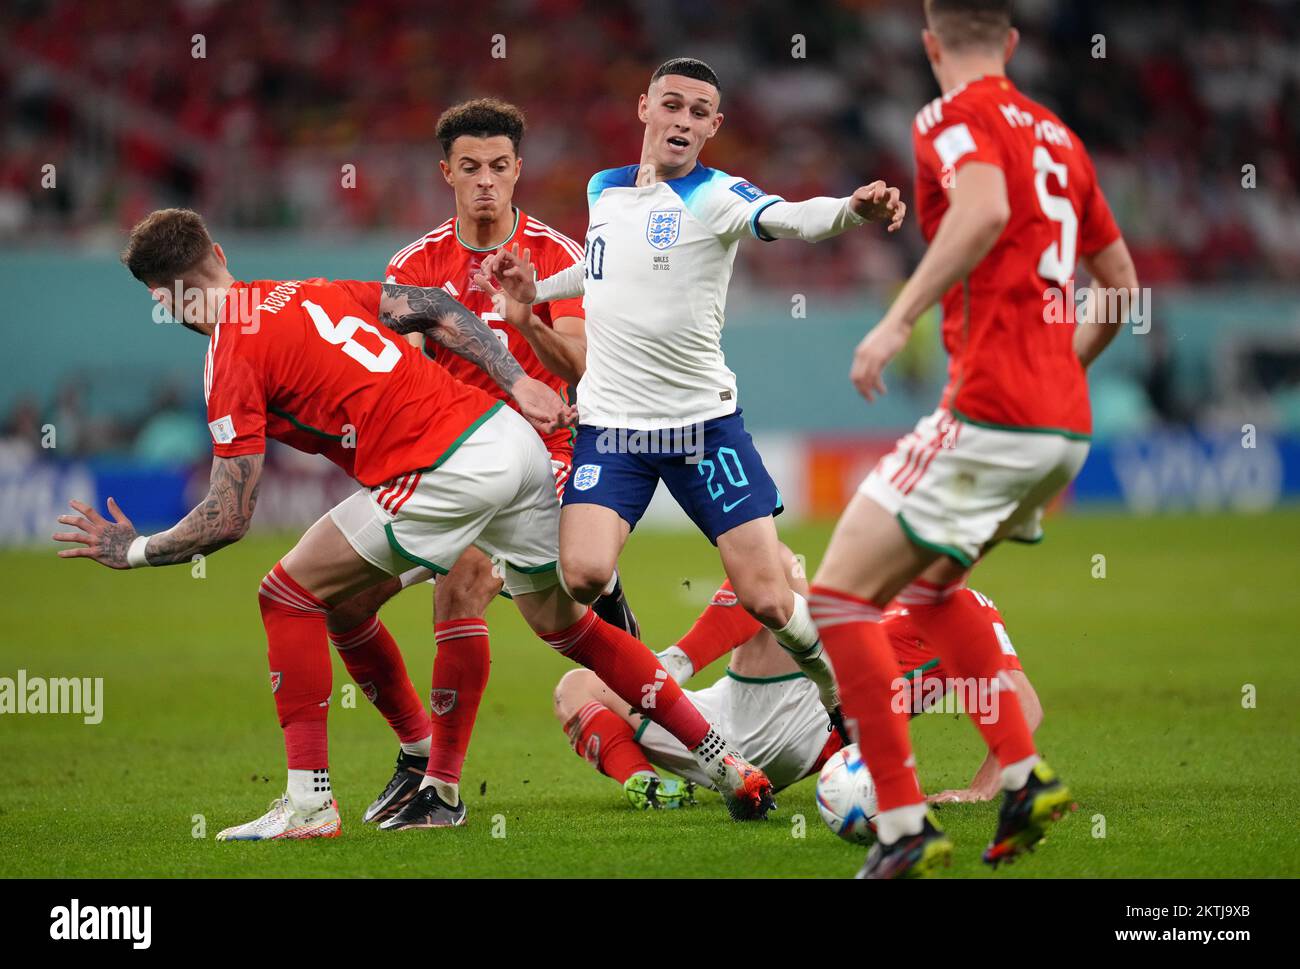 England's Phil Foden (centre) is fouled resulting in a free kick, which led to the opening England goal scored by Marcus Rashford during the FIFA World Cup Group B match at the Ahmad Bin Ali Stadium, Al Rayyan, Qatar. Picture date: Tuesday November 29, 2022. Stock Photo